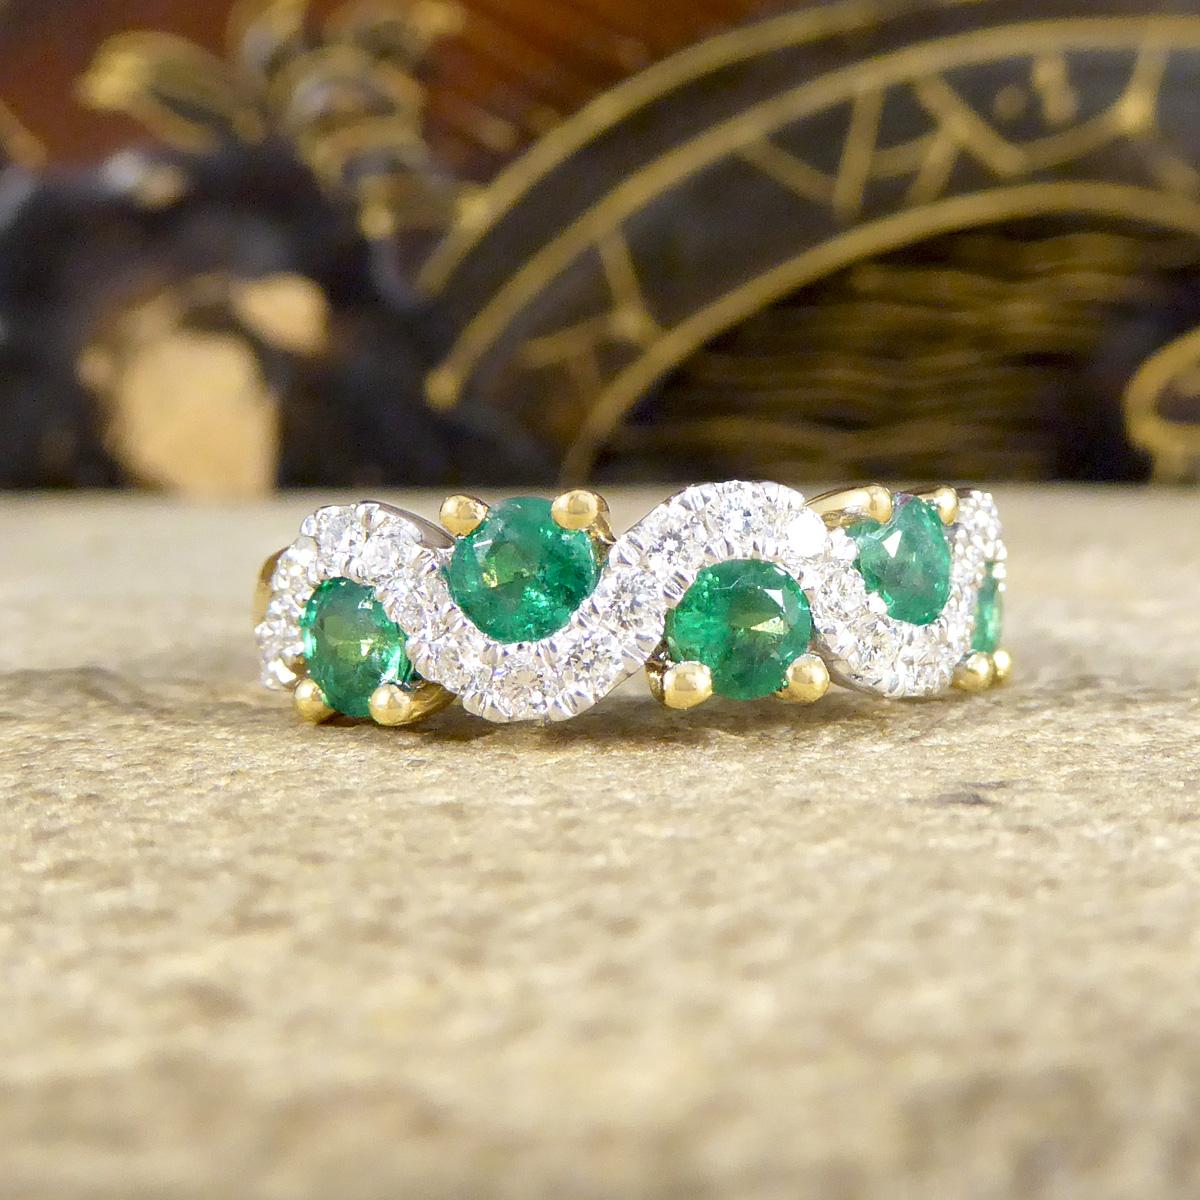 This lovely contemporary ring is the perfect style to be worn on its own or as a stackable ring. A beautiful half eternity ring with a difference! It sparkles across the whole face of the finger with round cut Emeralds weighing 0.13ct each